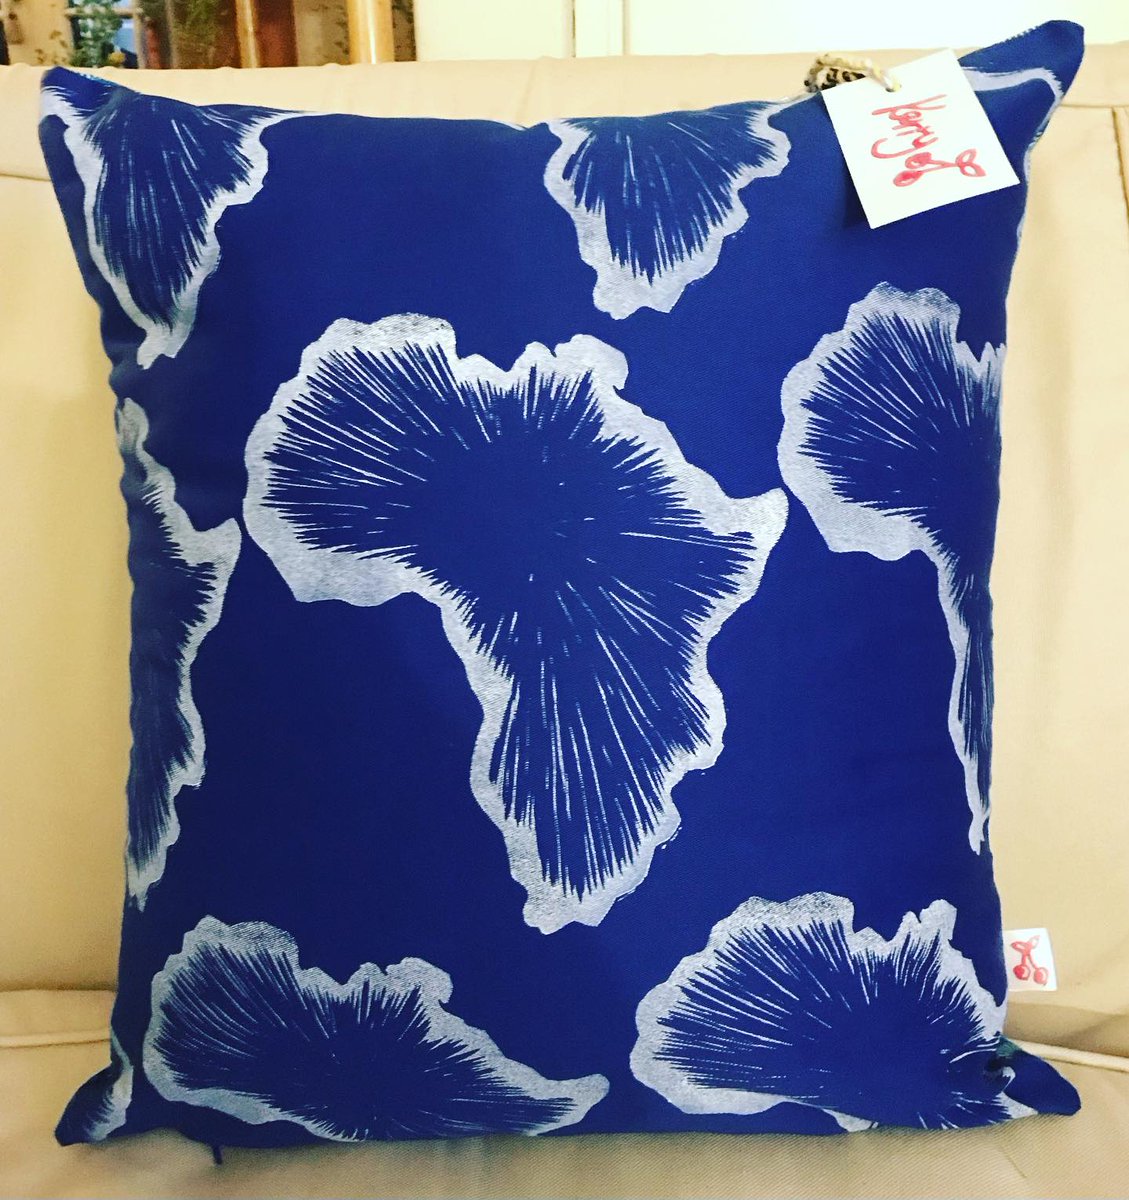 Hand printed Africa lino on Royal Blue.  Available in any size and colour. Message me for orders. #Africa #CapeTown #handprinted #handprintedtextiles #kerrycherry